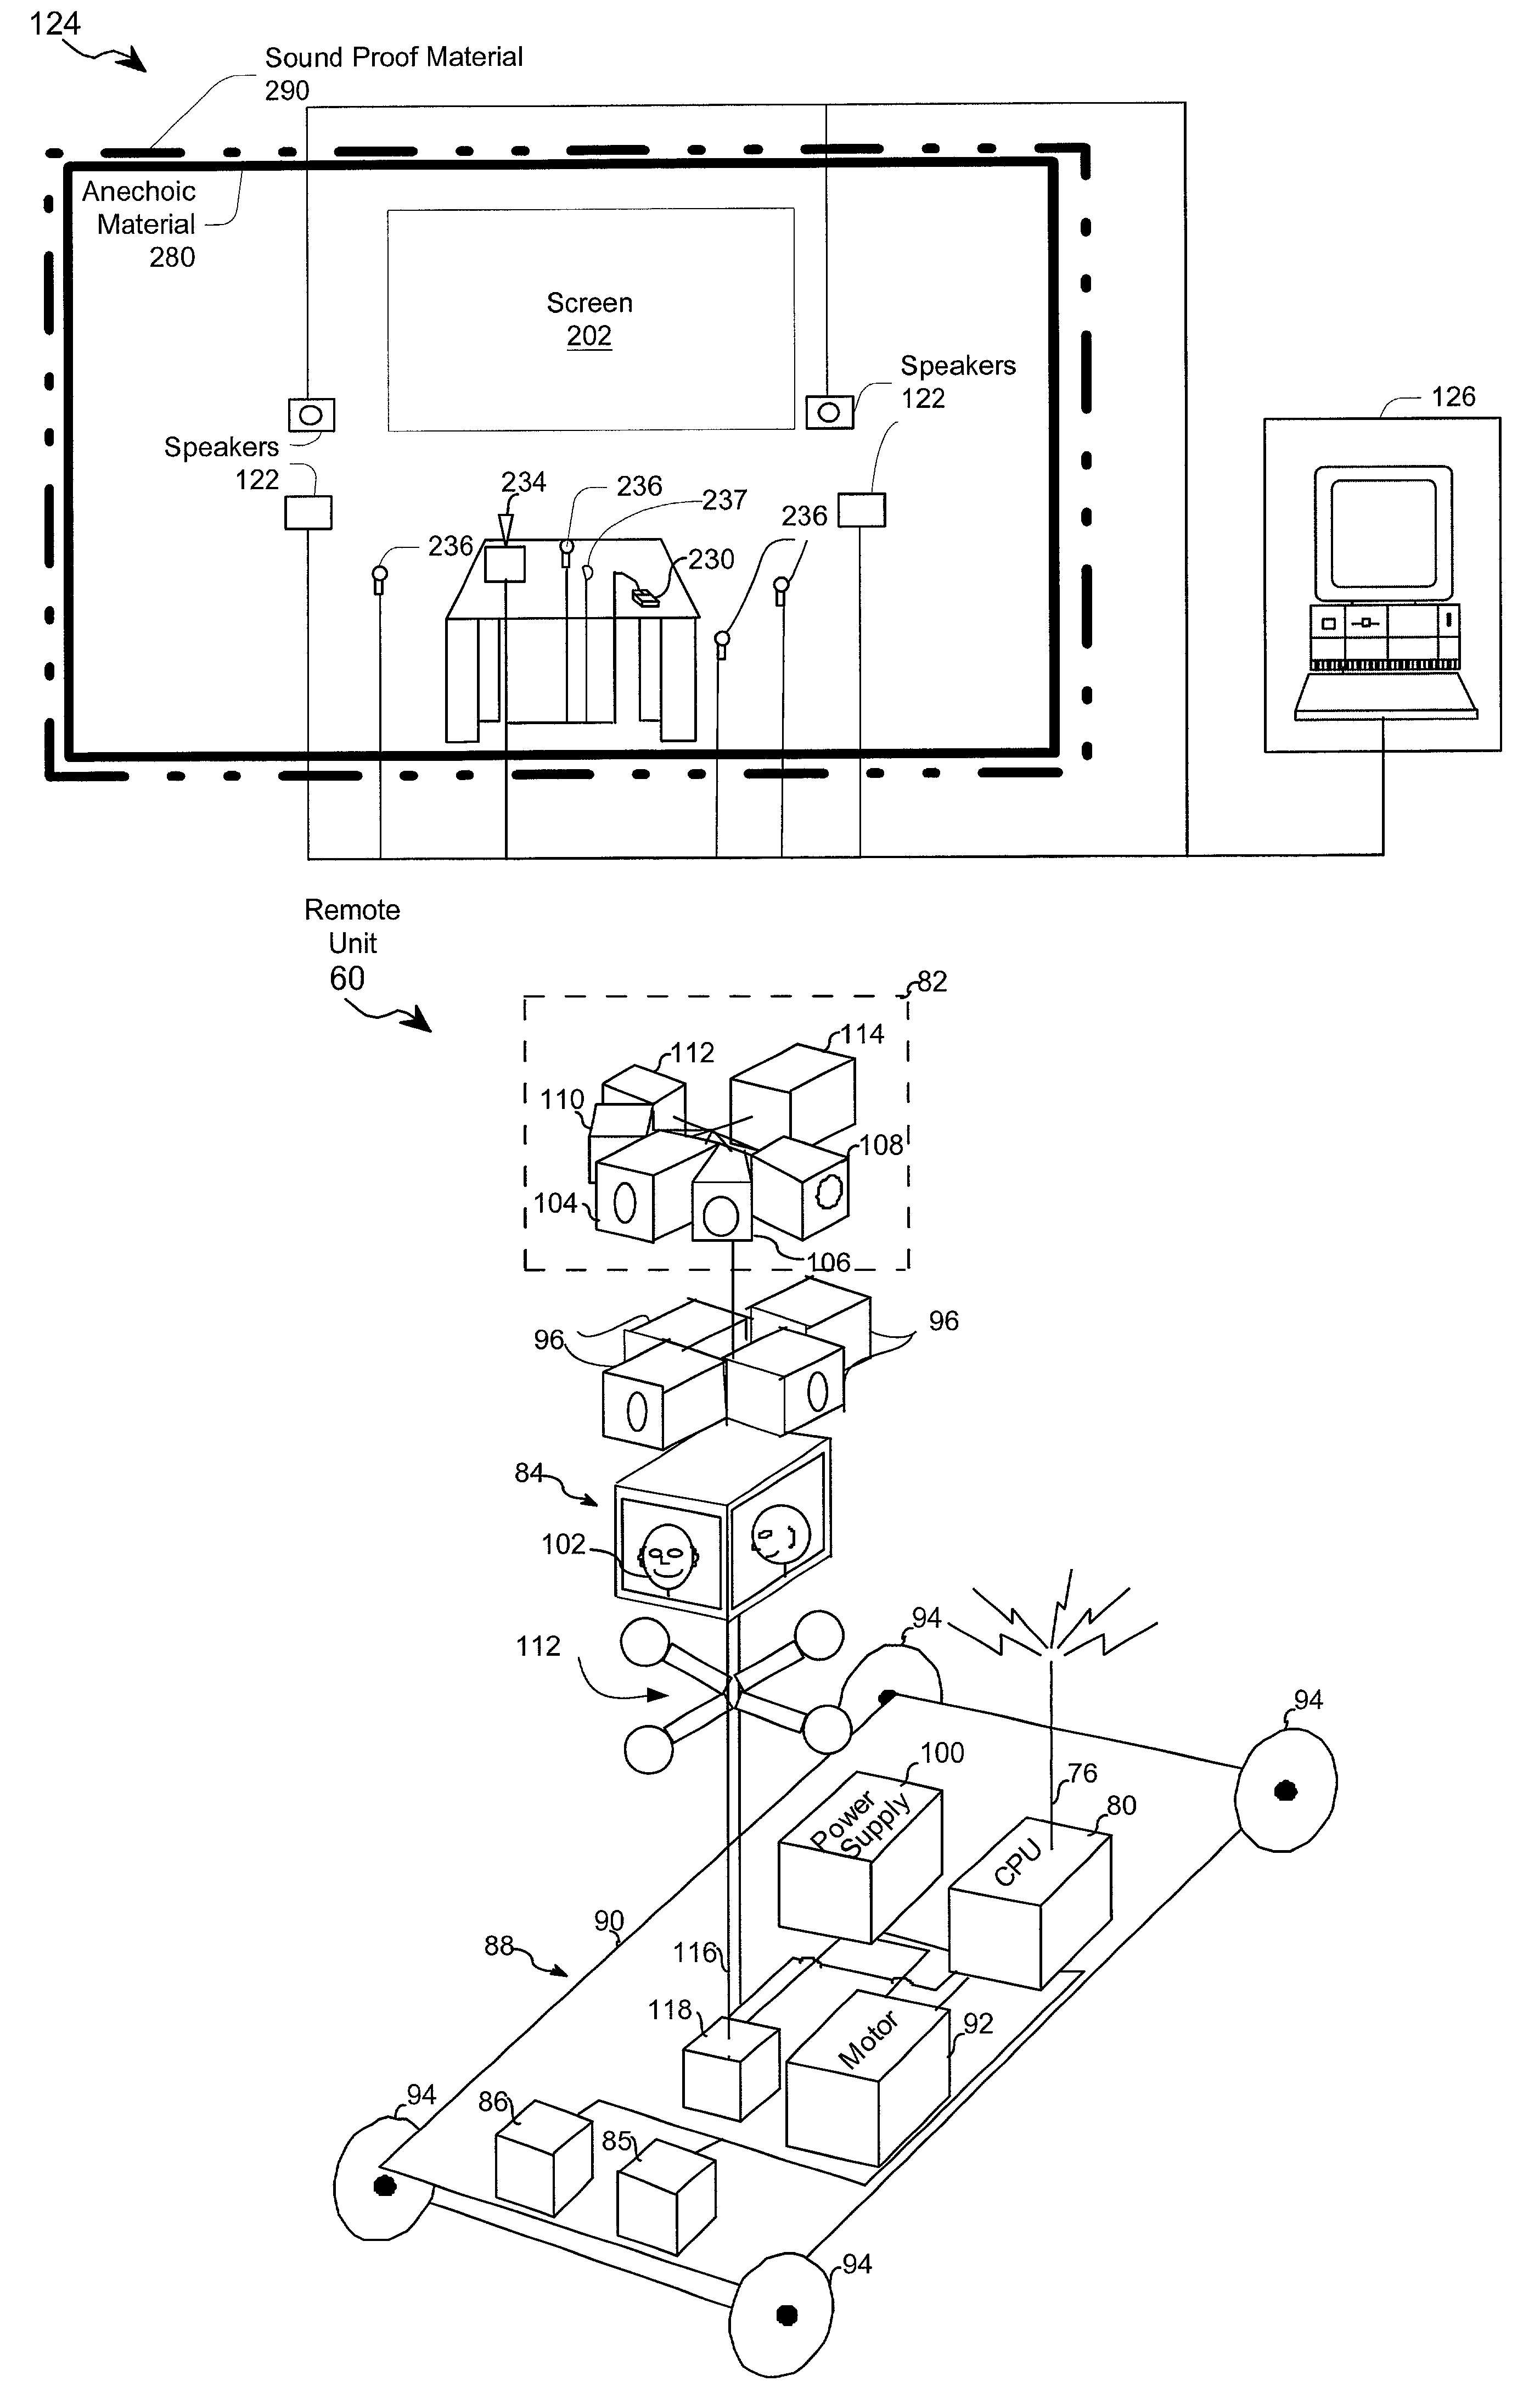 System and method for audio telepresence